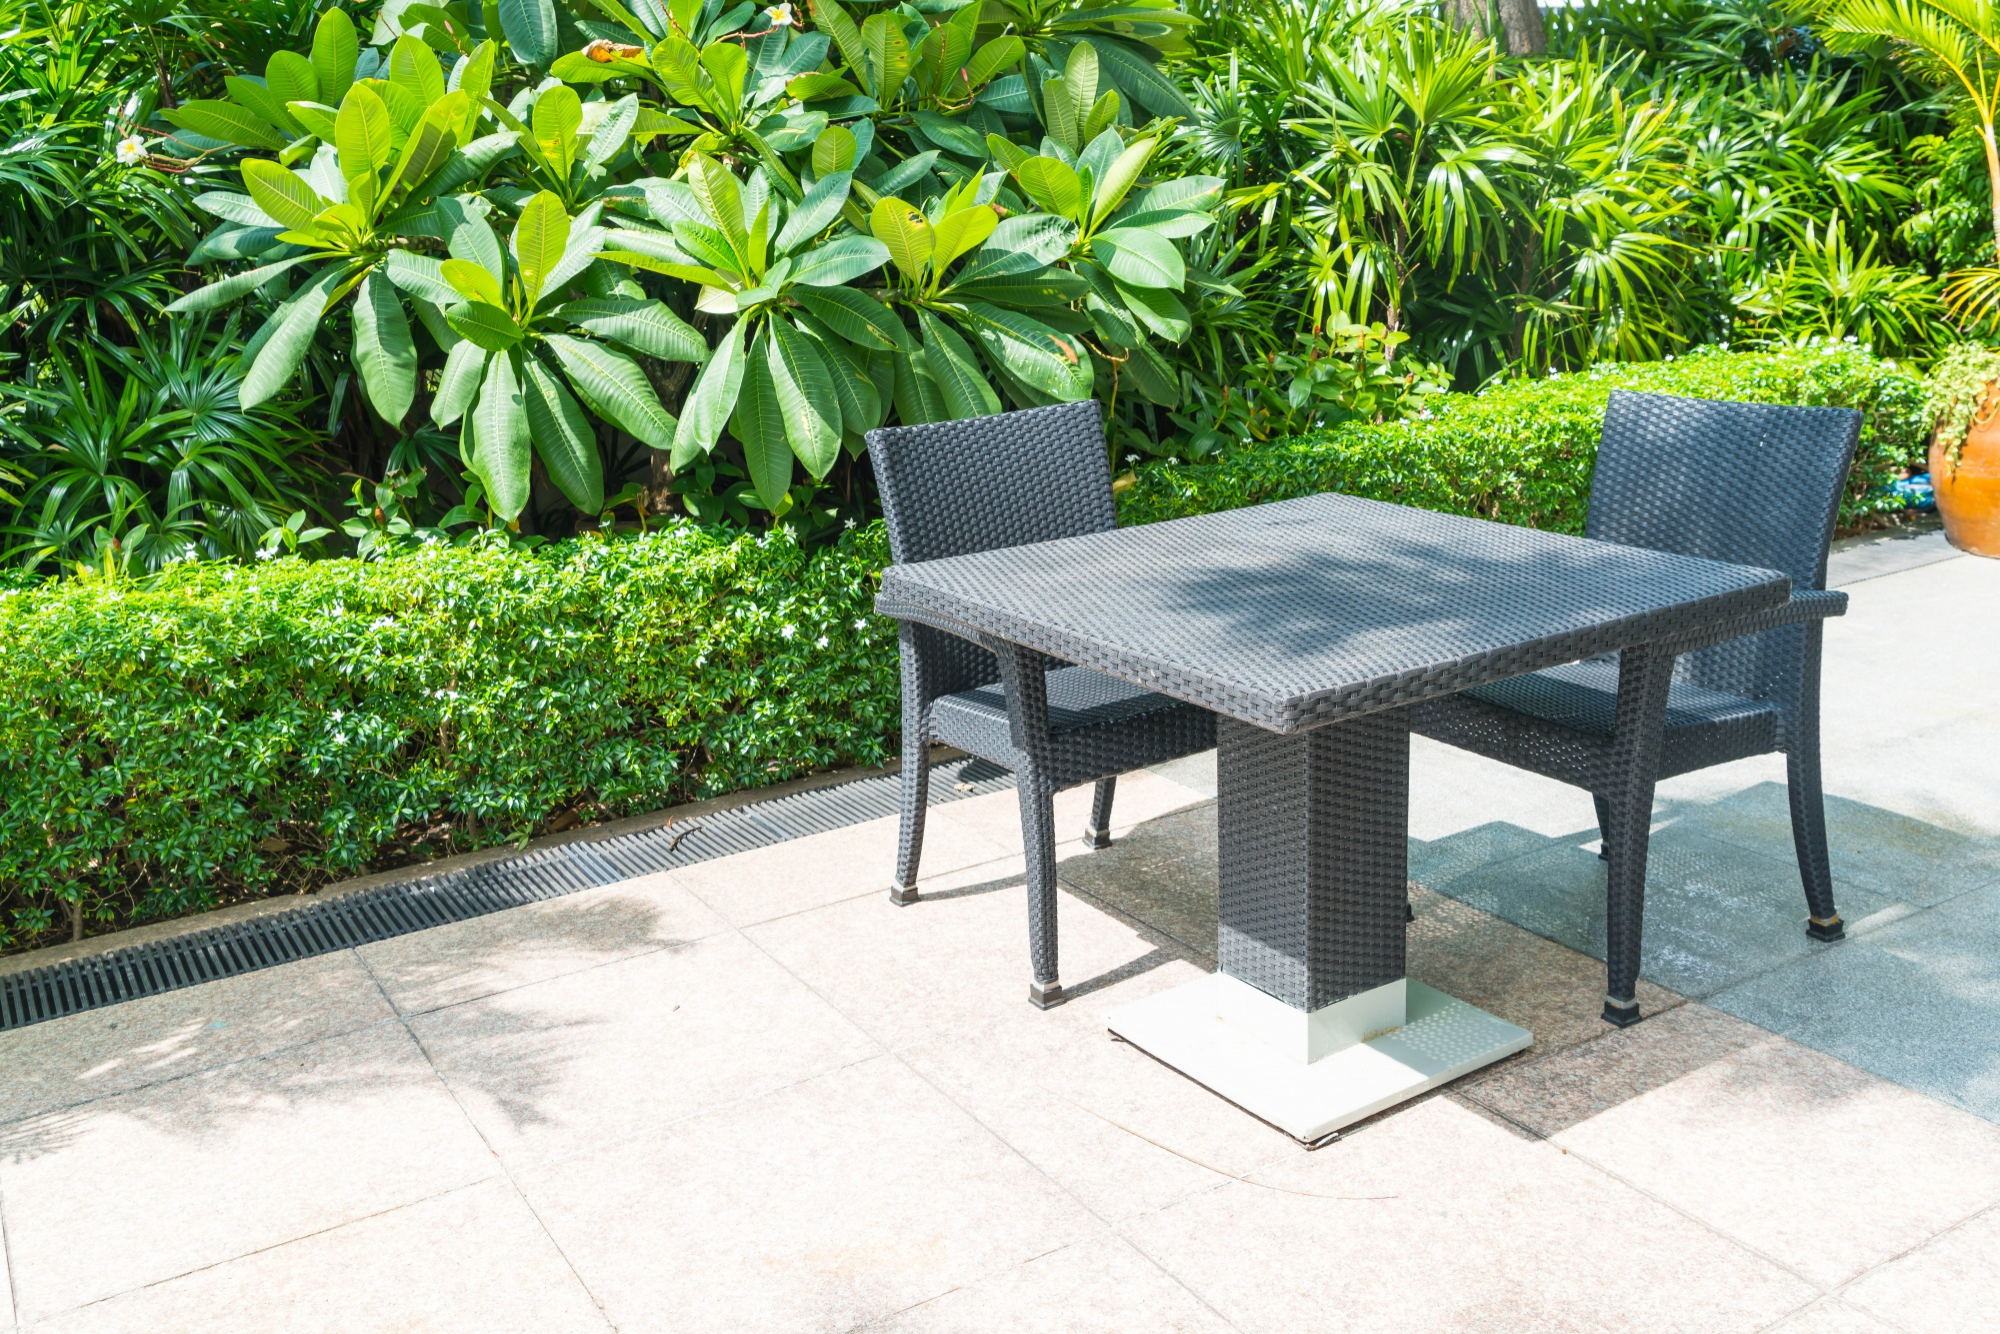 outdoor-patio-with-chair-table